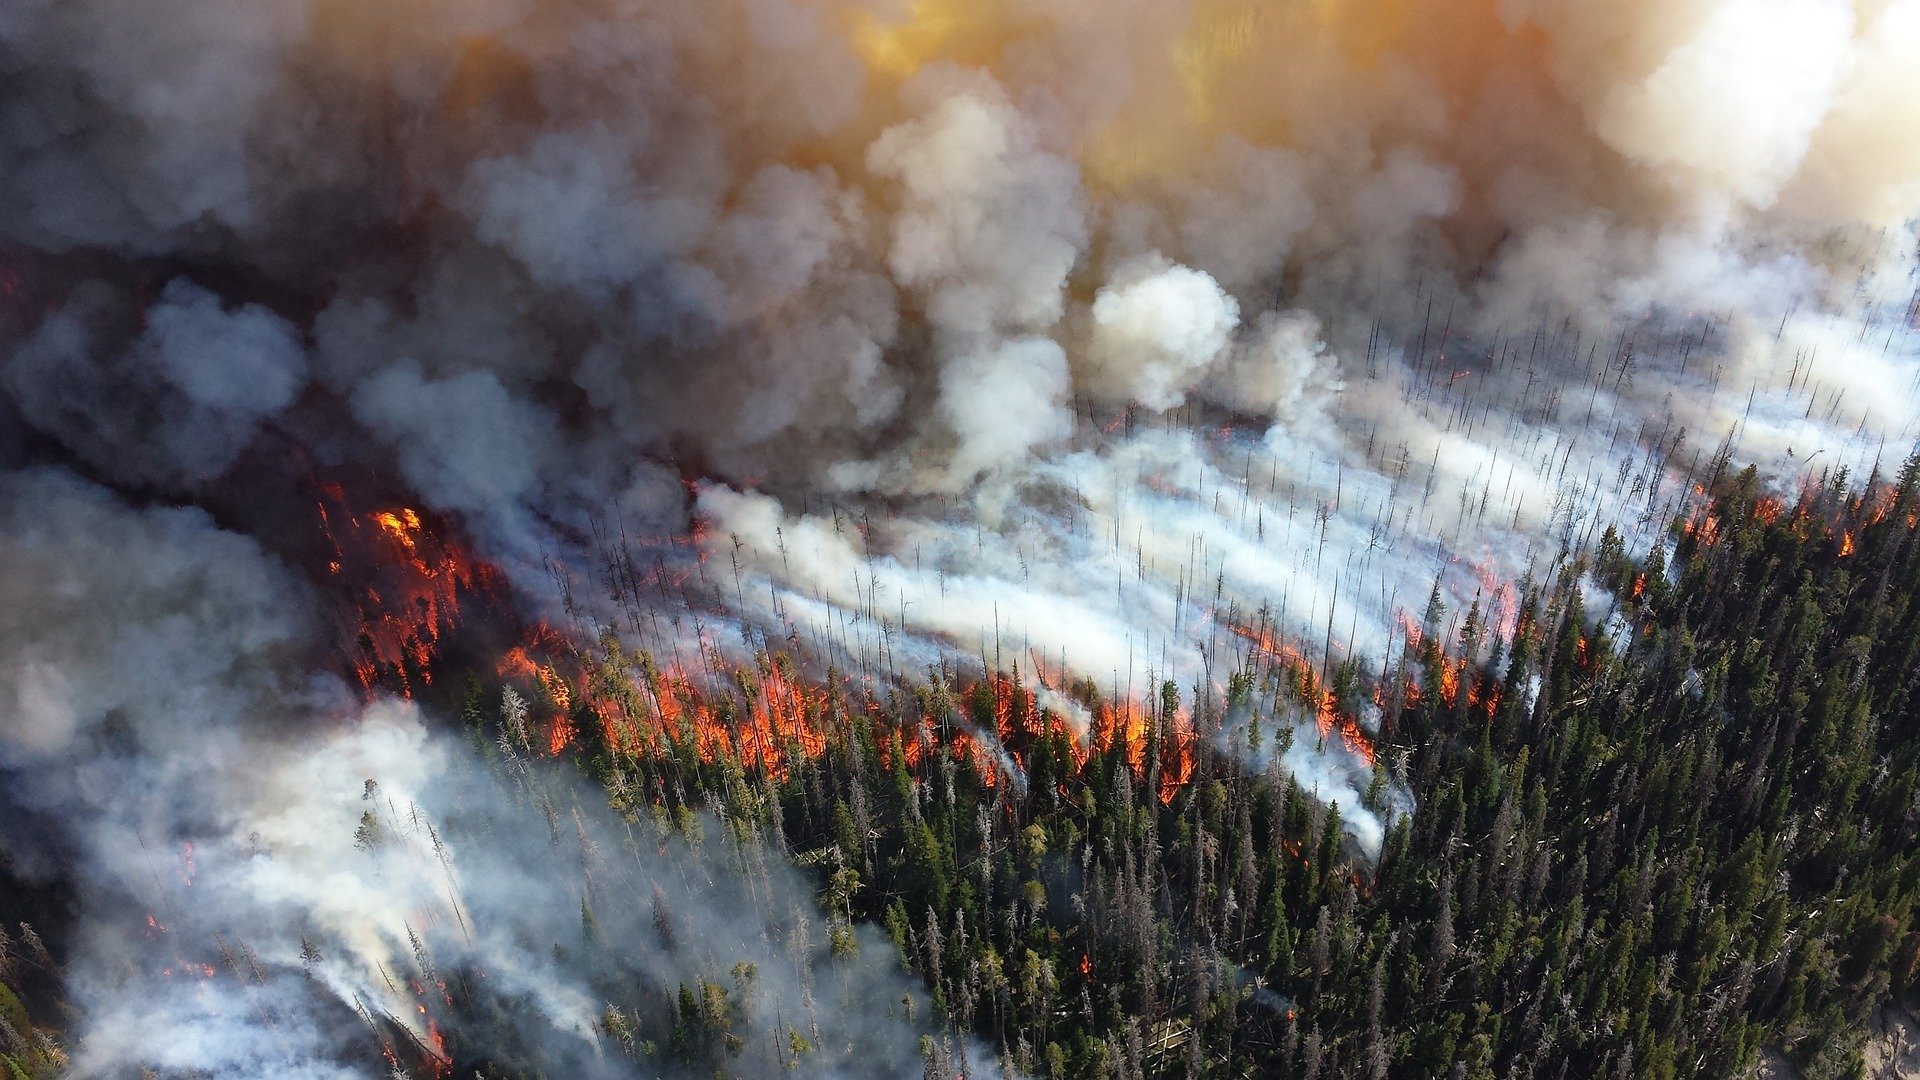 Scientists show how wildfire smoke increases ozone pollution